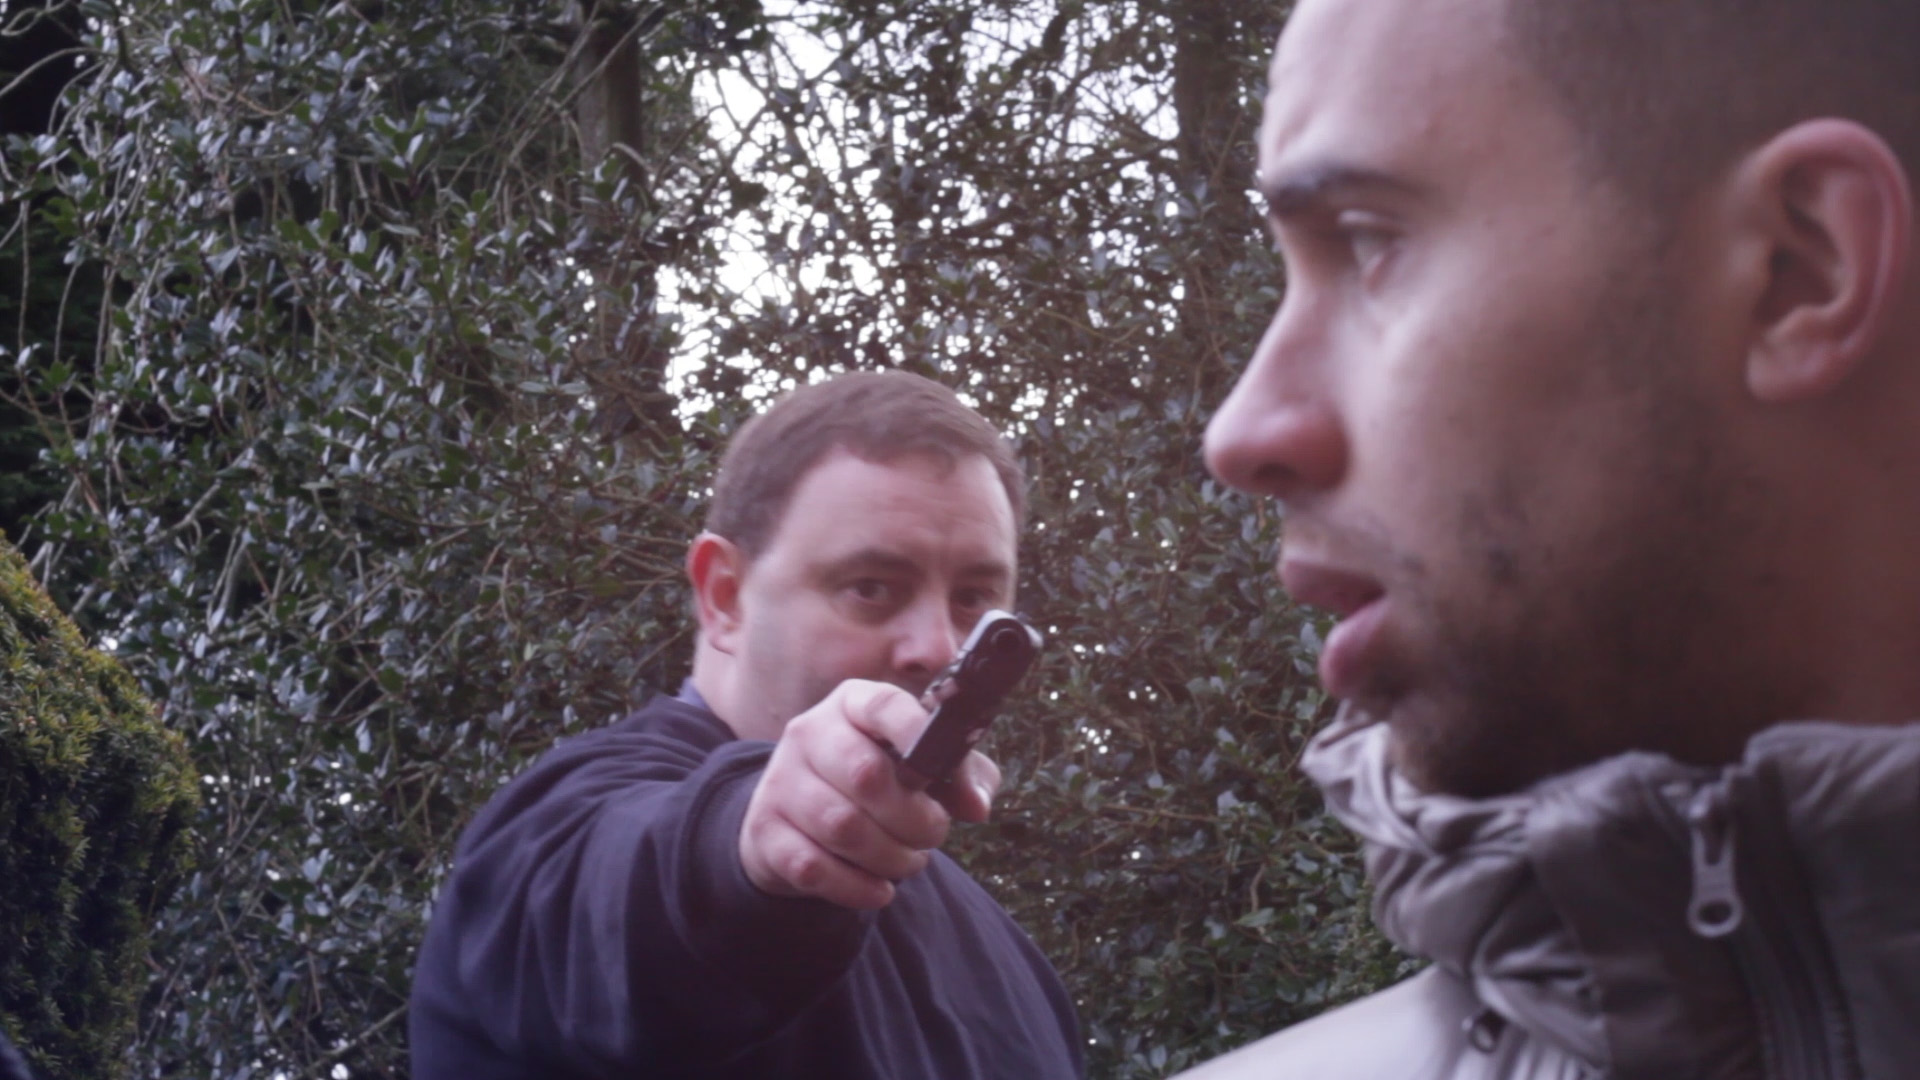 A still from the footage of '10 Grams' with Lloyd James and Conner Lynch